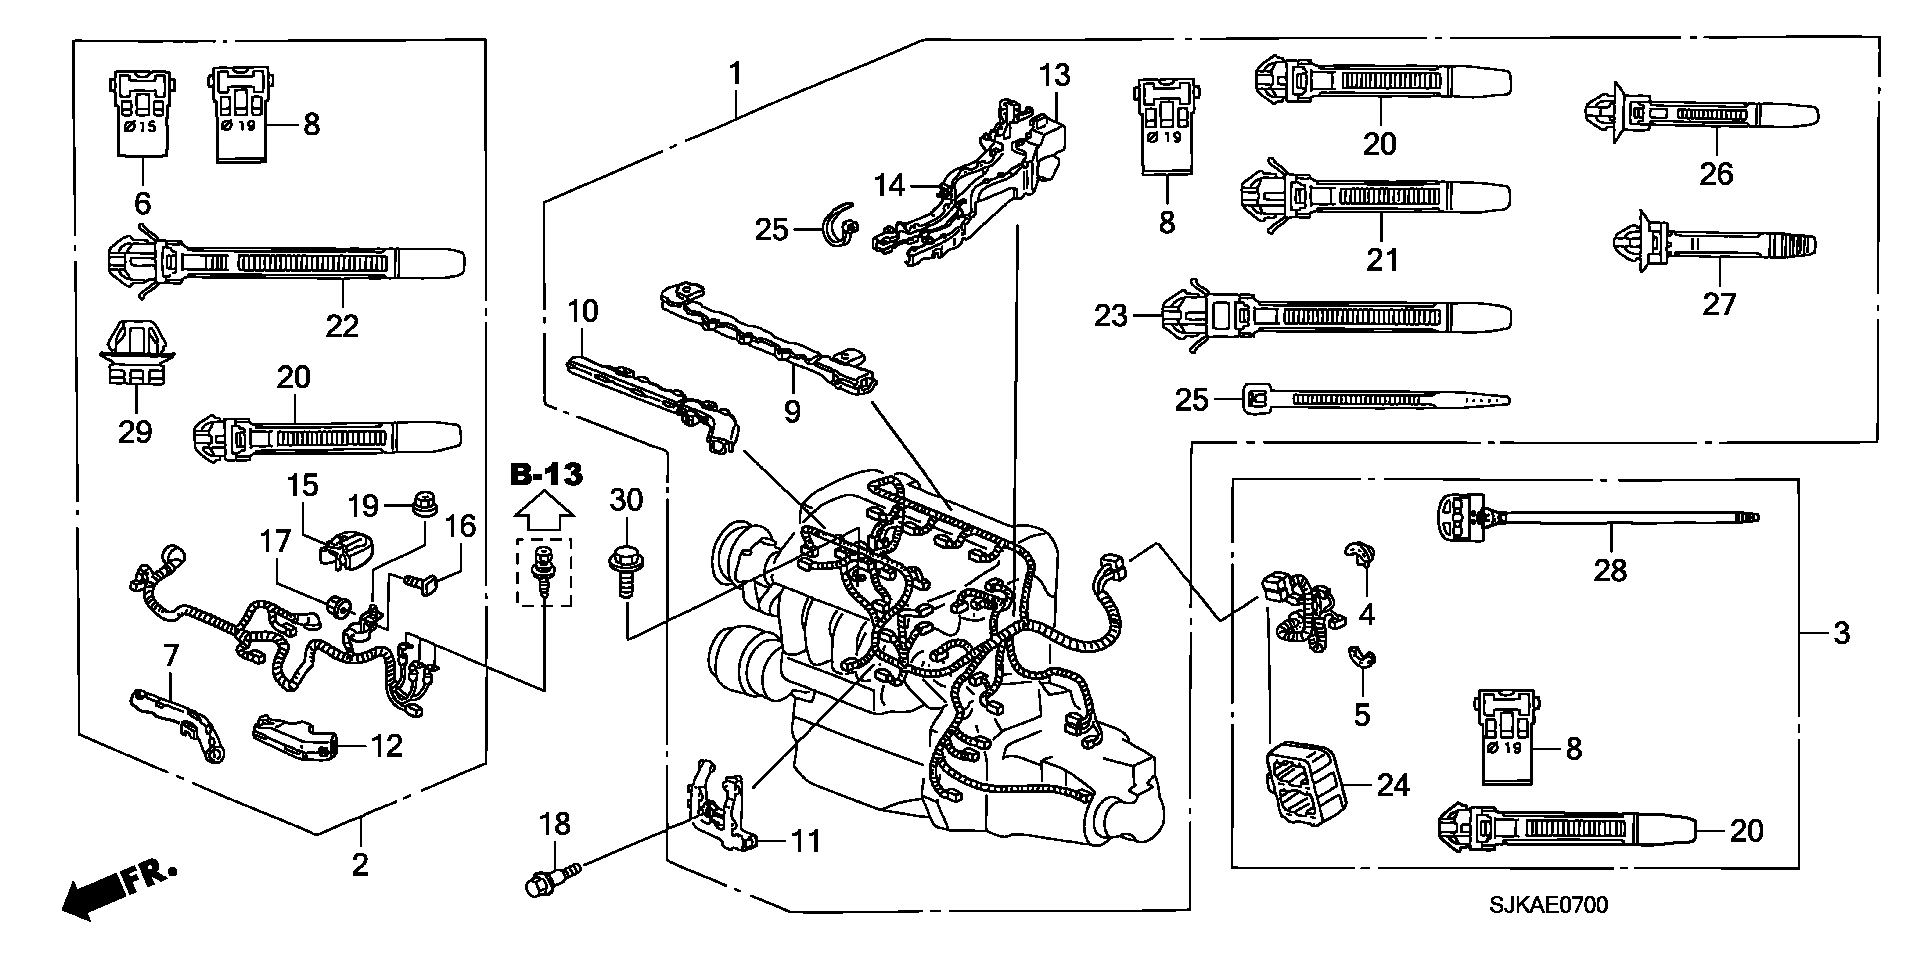 ENGINE WIRE HARNESS(L4)